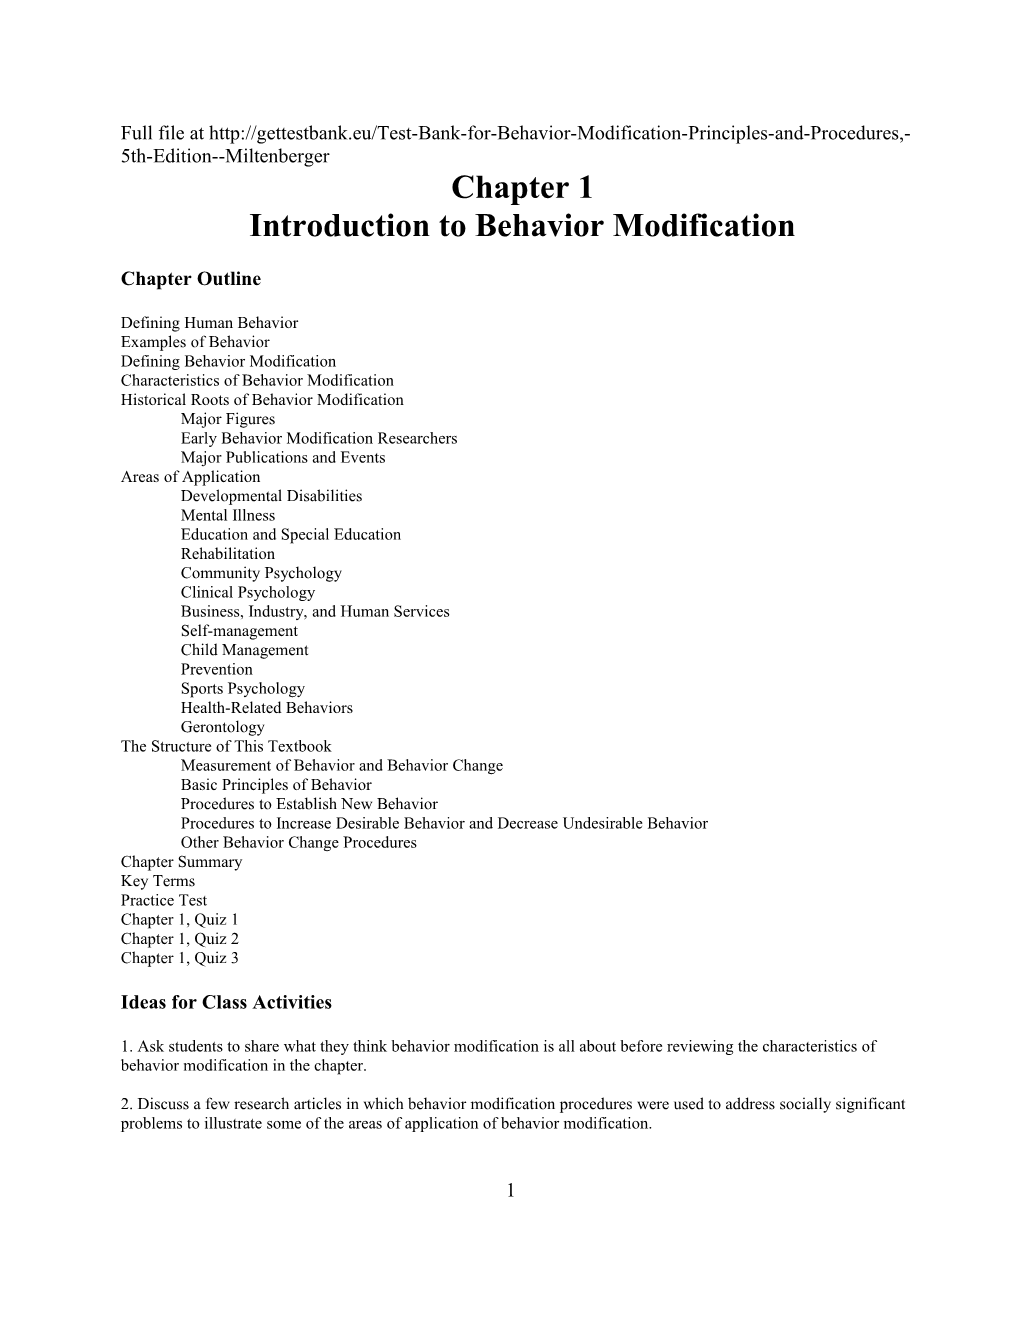 Introduction to Behavior Modification